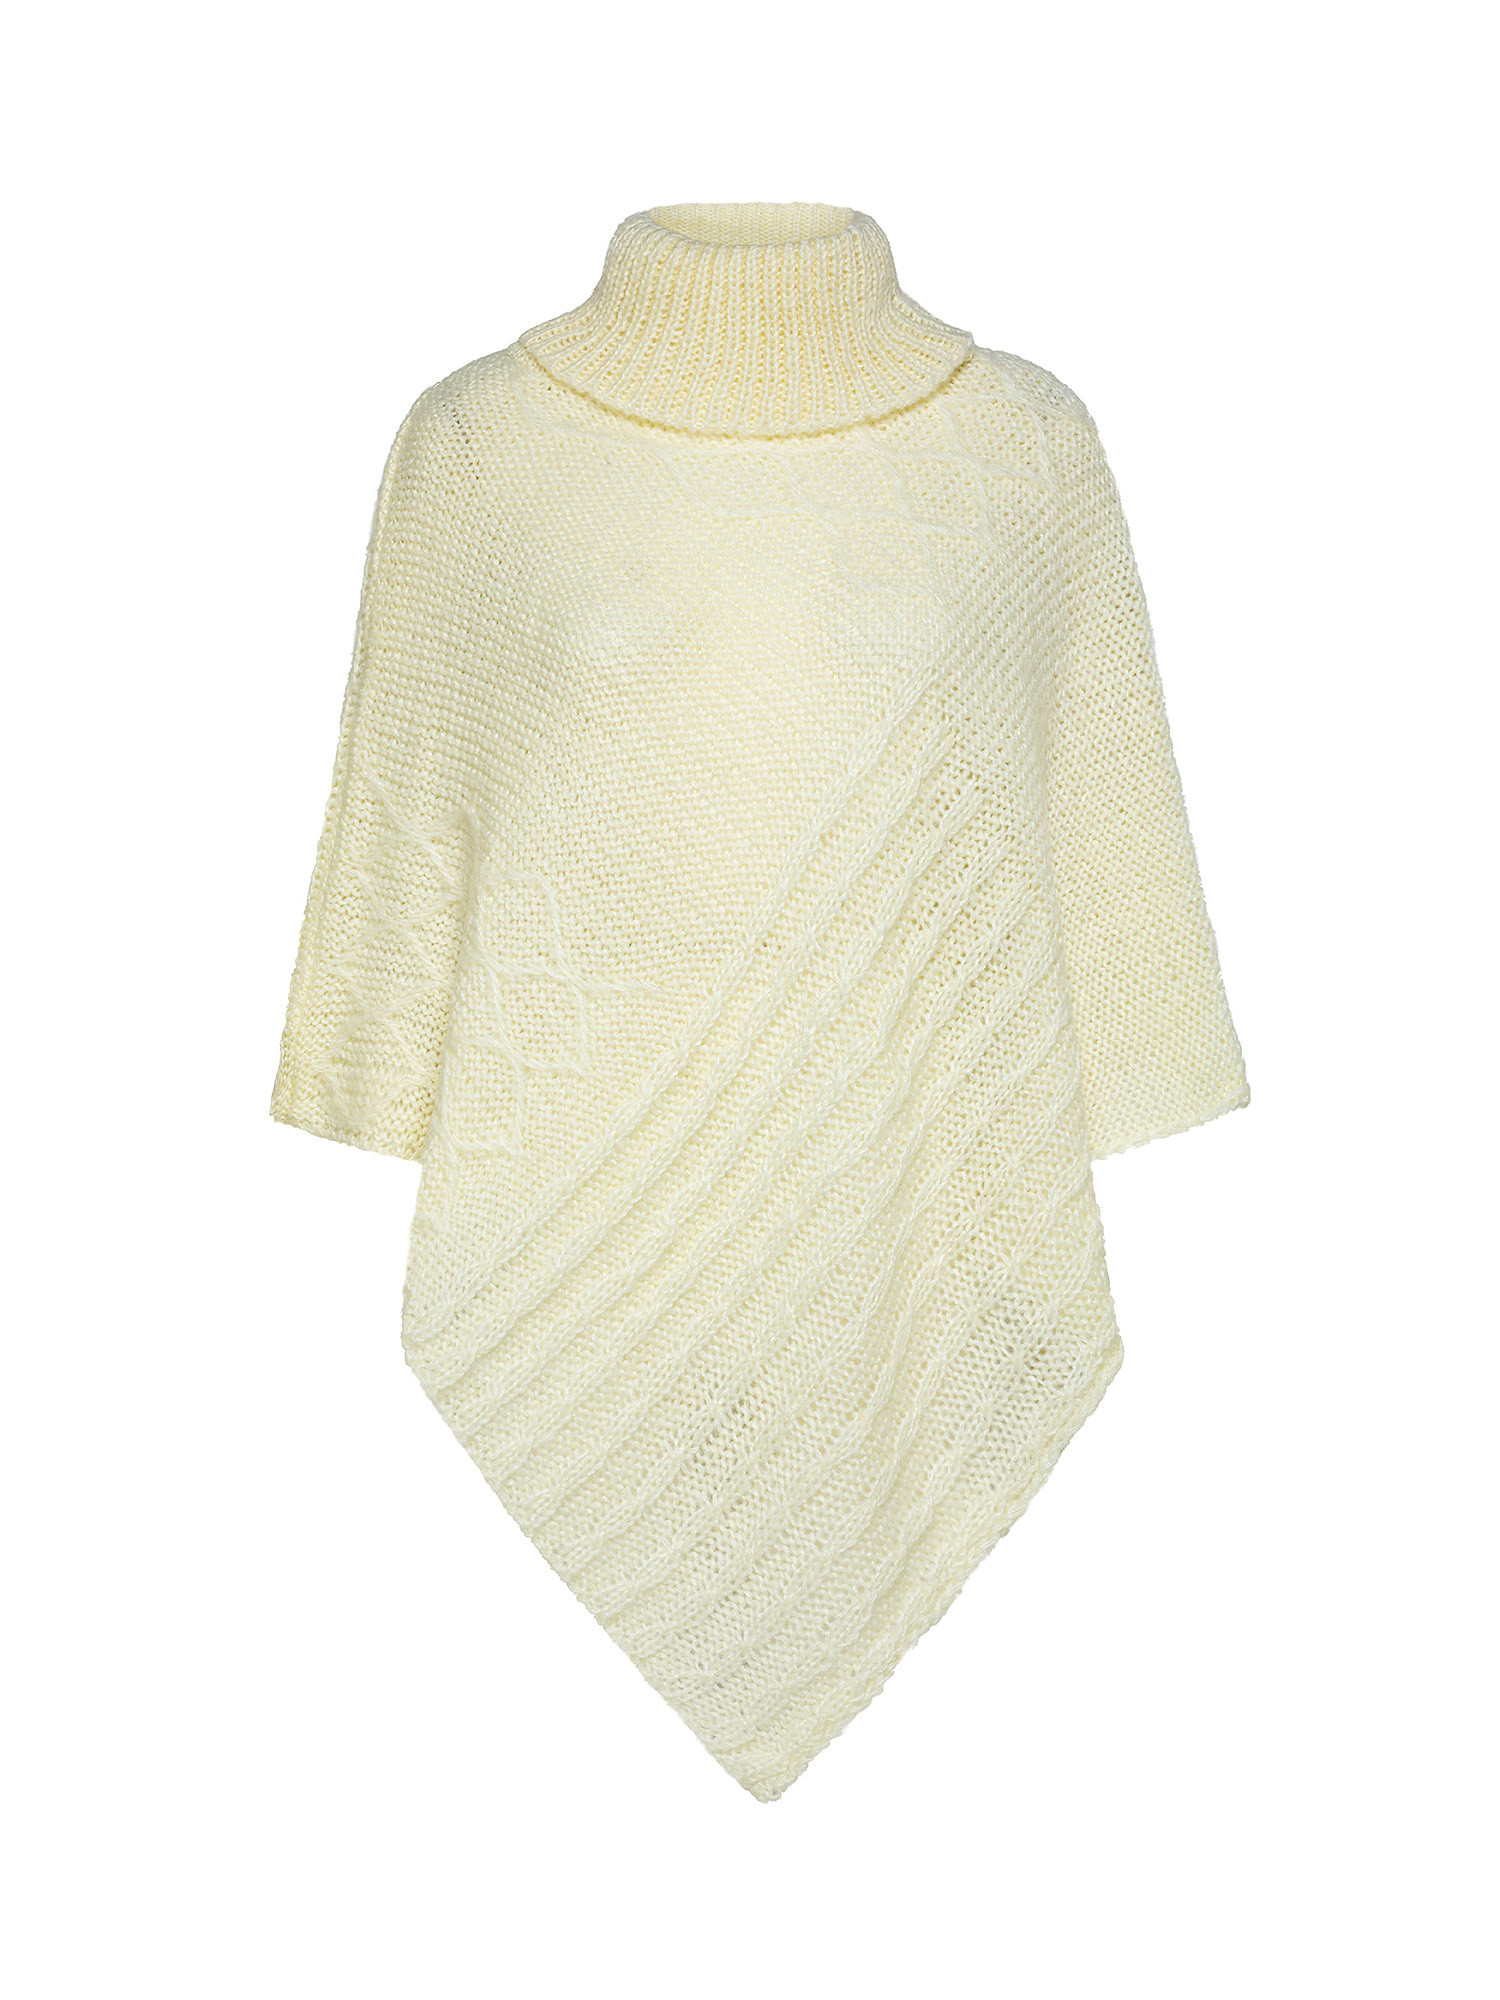 Poncho with high collar, White, large image number 0